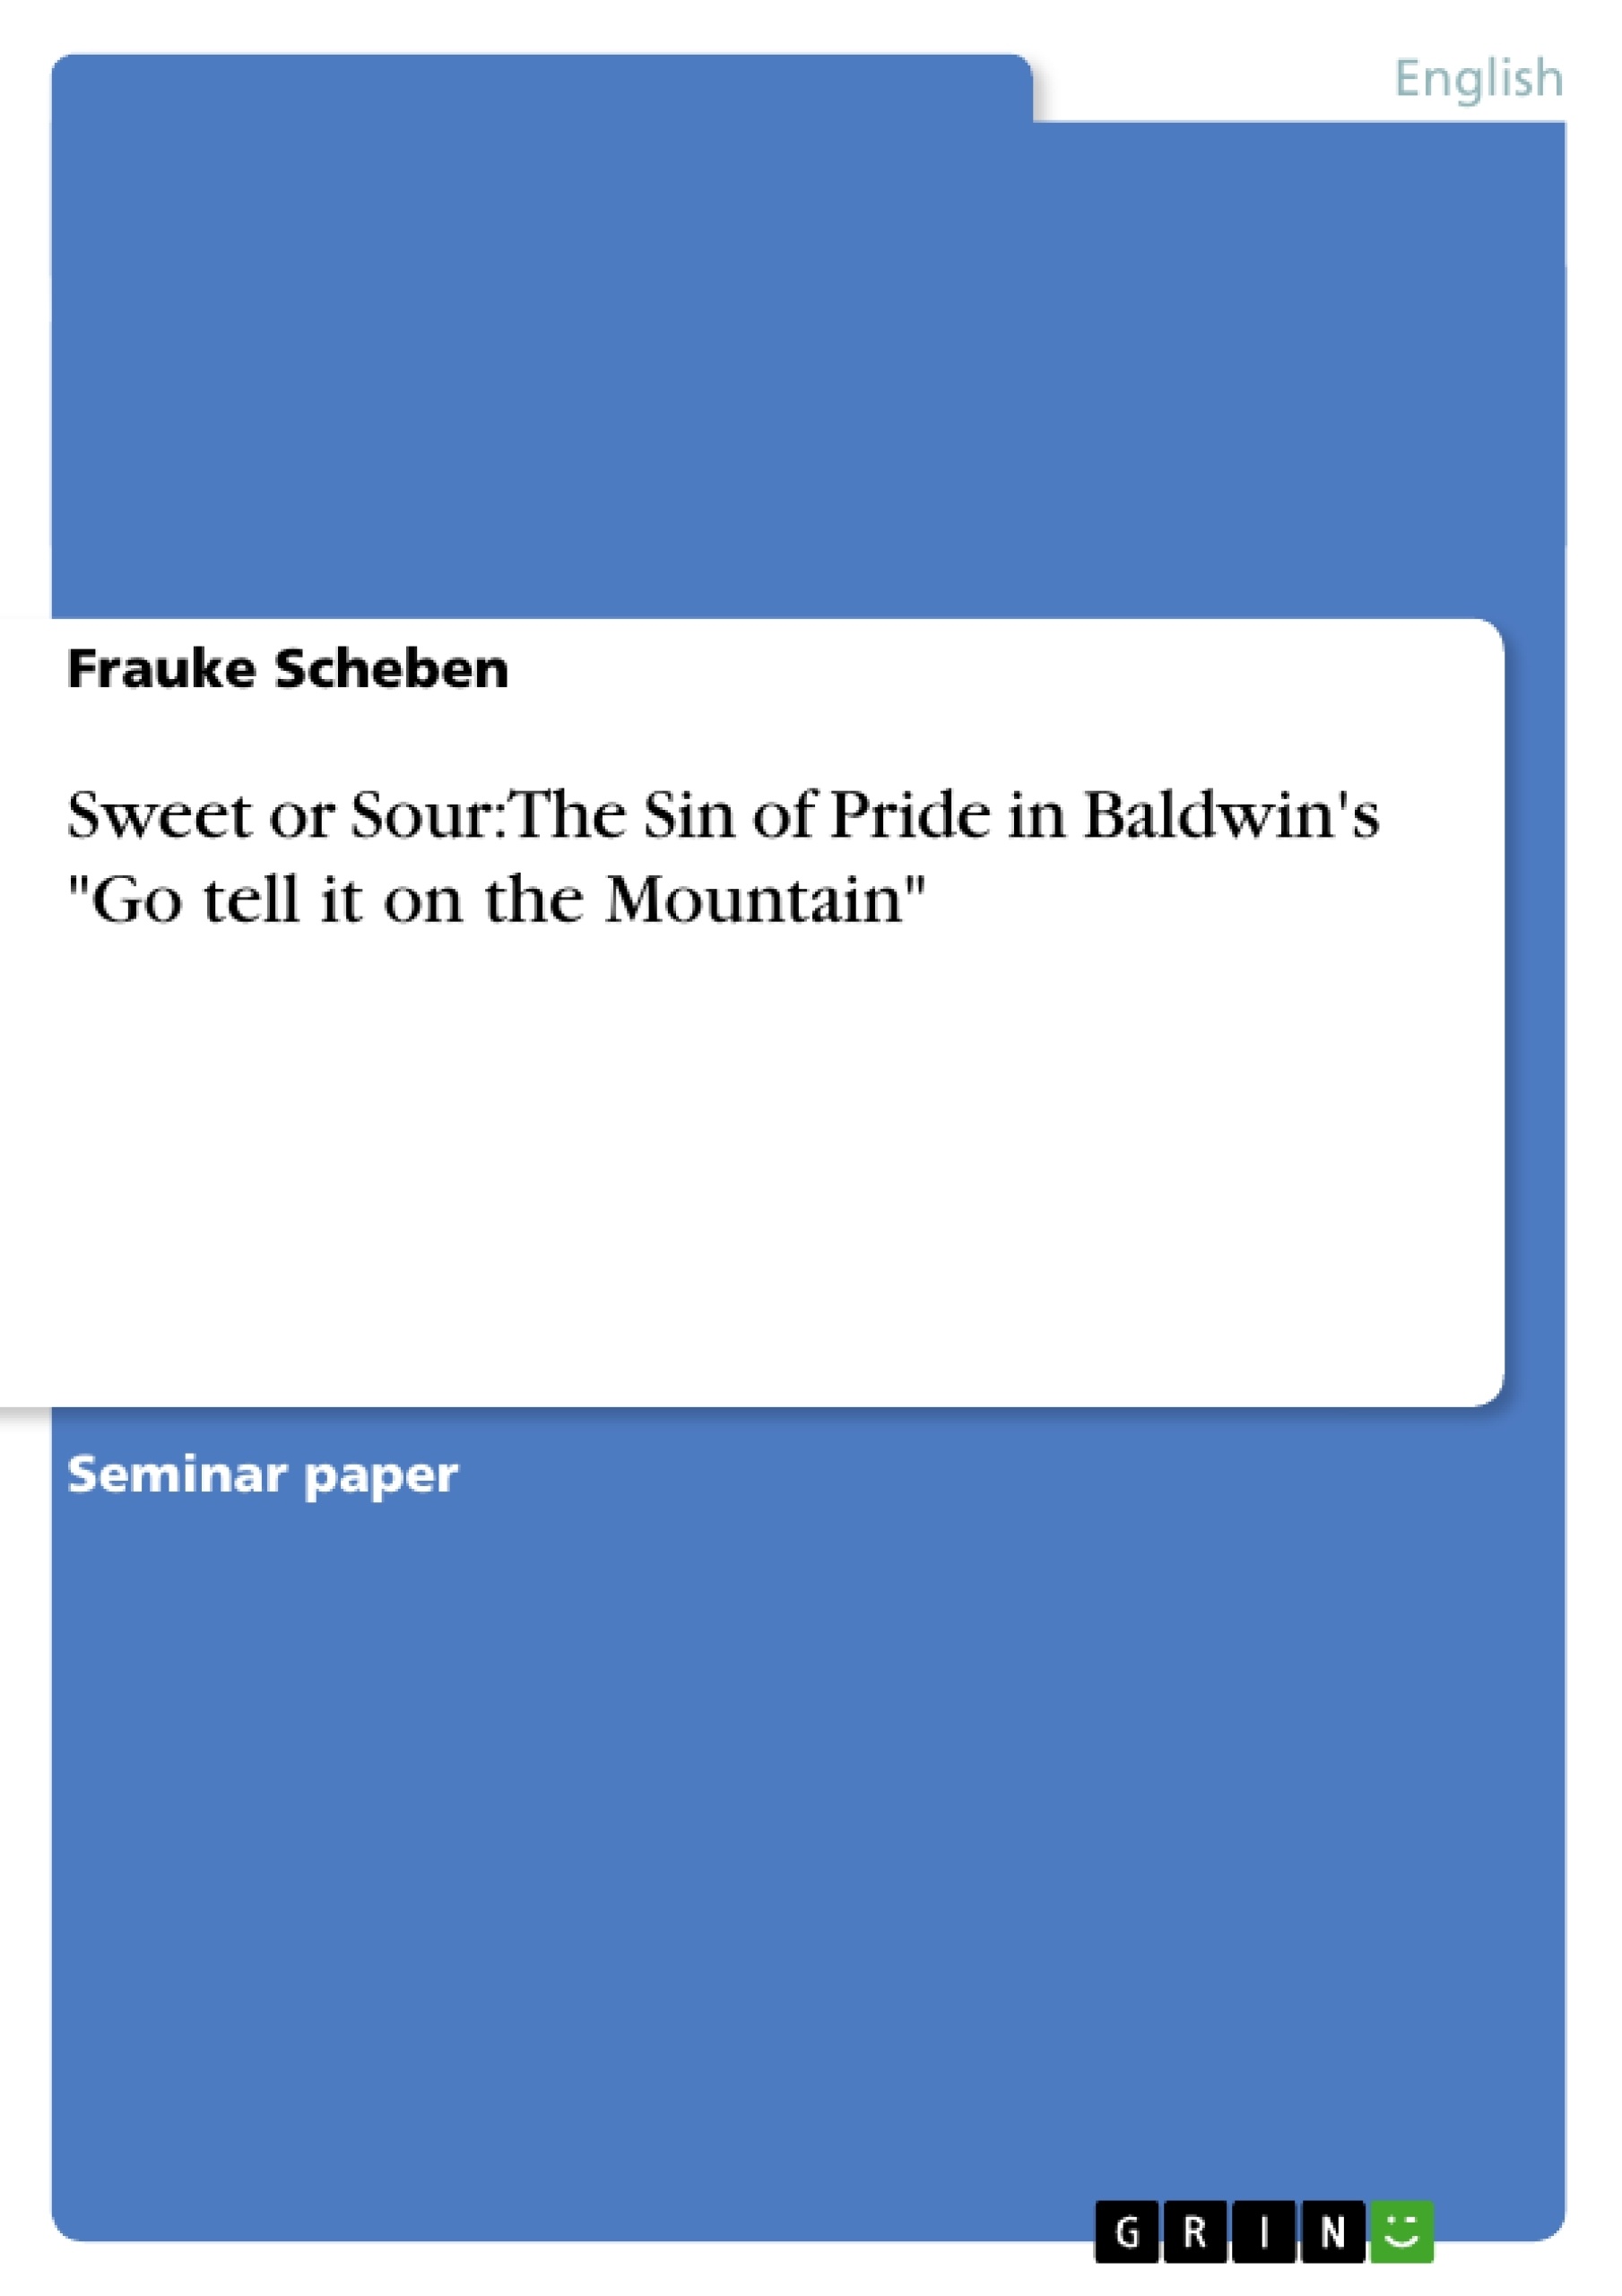 Title: Sweet or Sour: The Sin of Pride in Baldwin's "Go tell it on the Mountain"